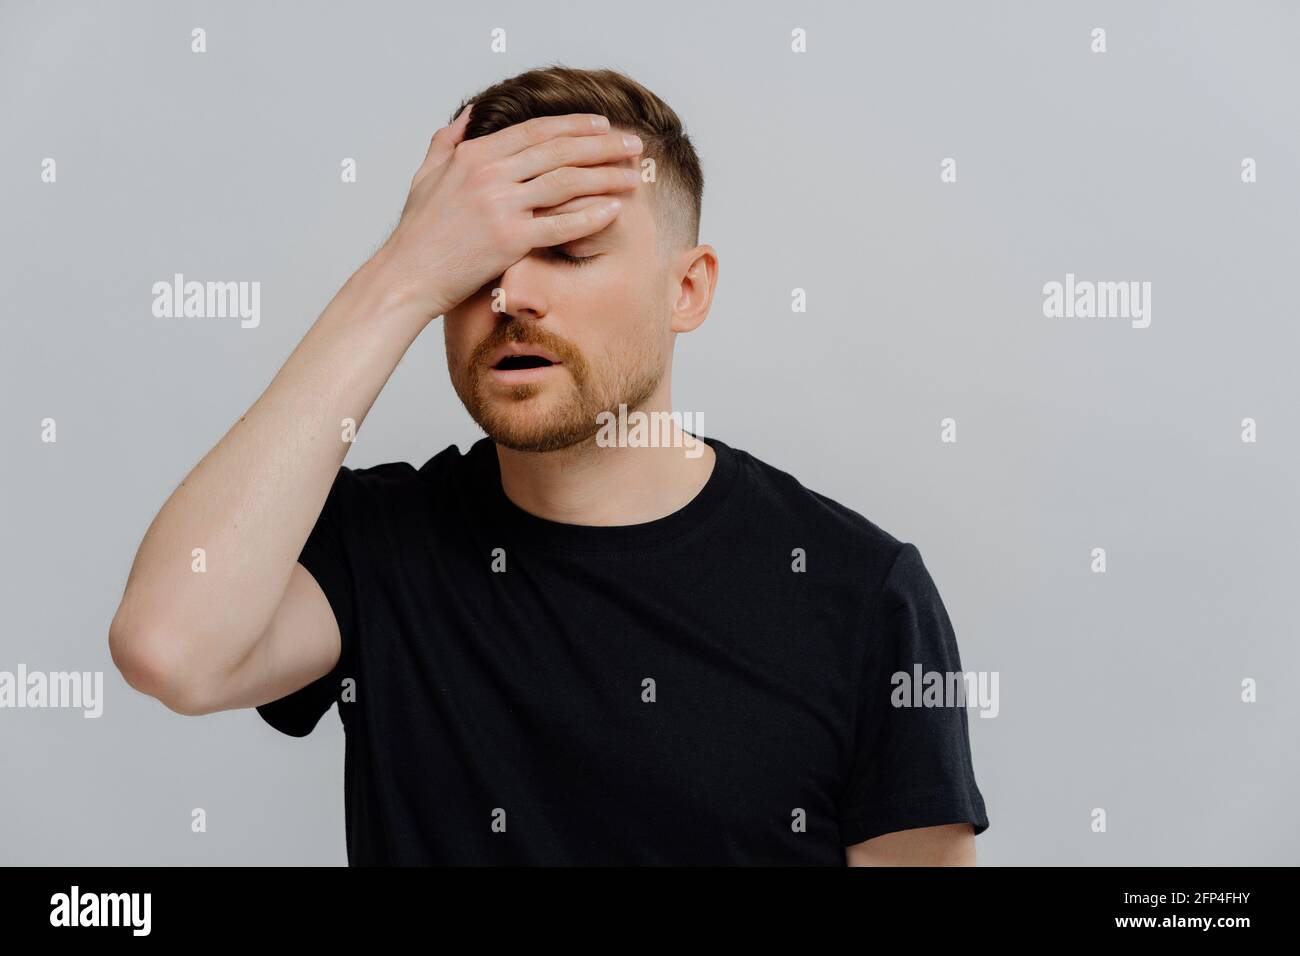 Depressed man doing facepalm gesture and being disappointed Stock Photo